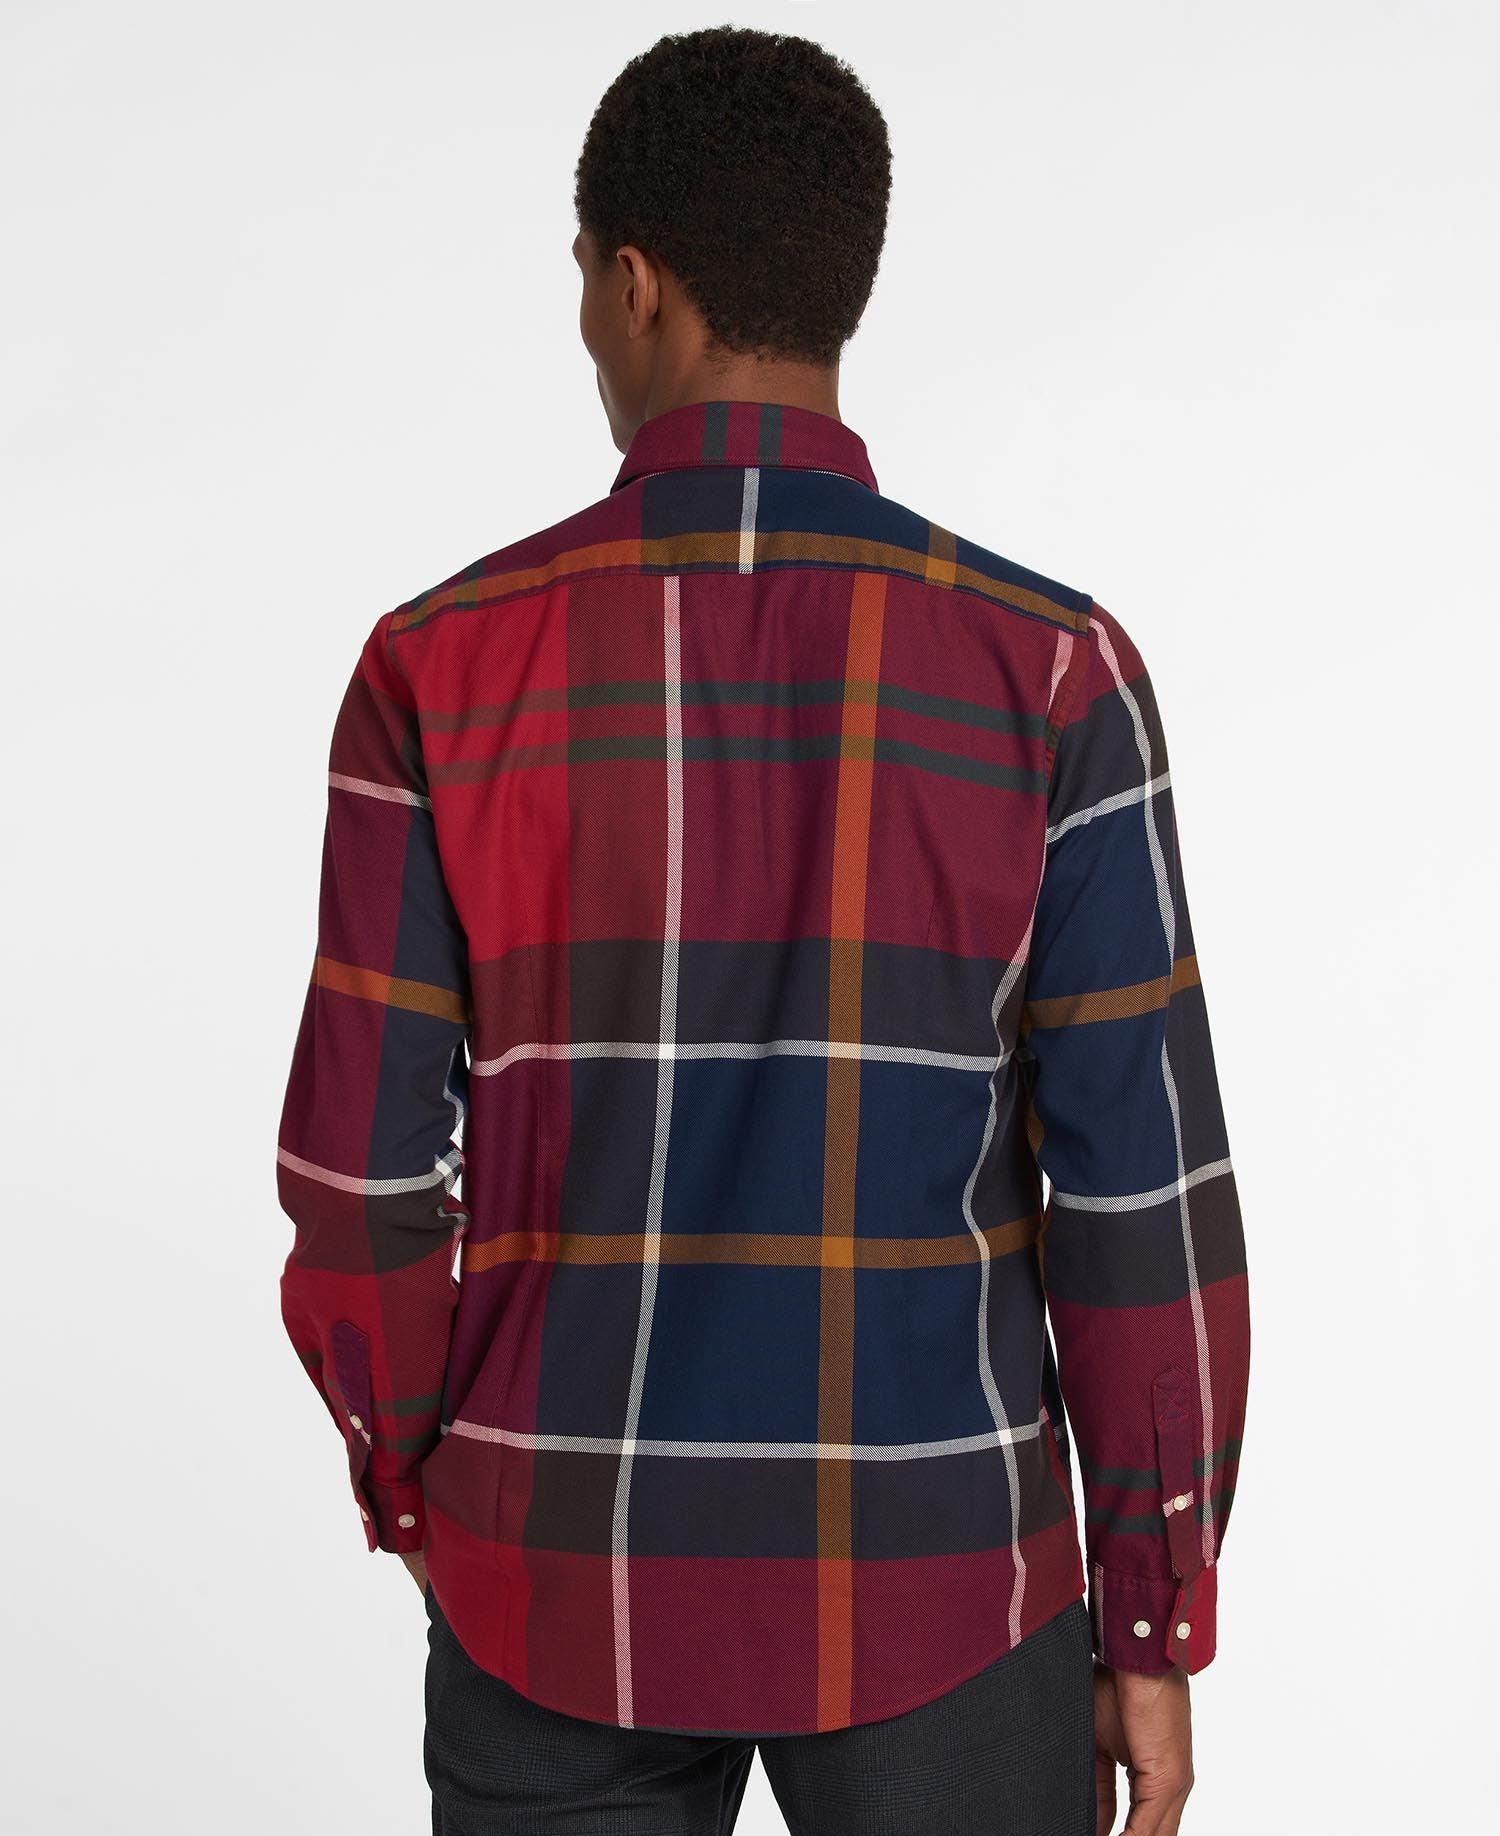 Barbour Dunoon TF Shirt RE52 Red